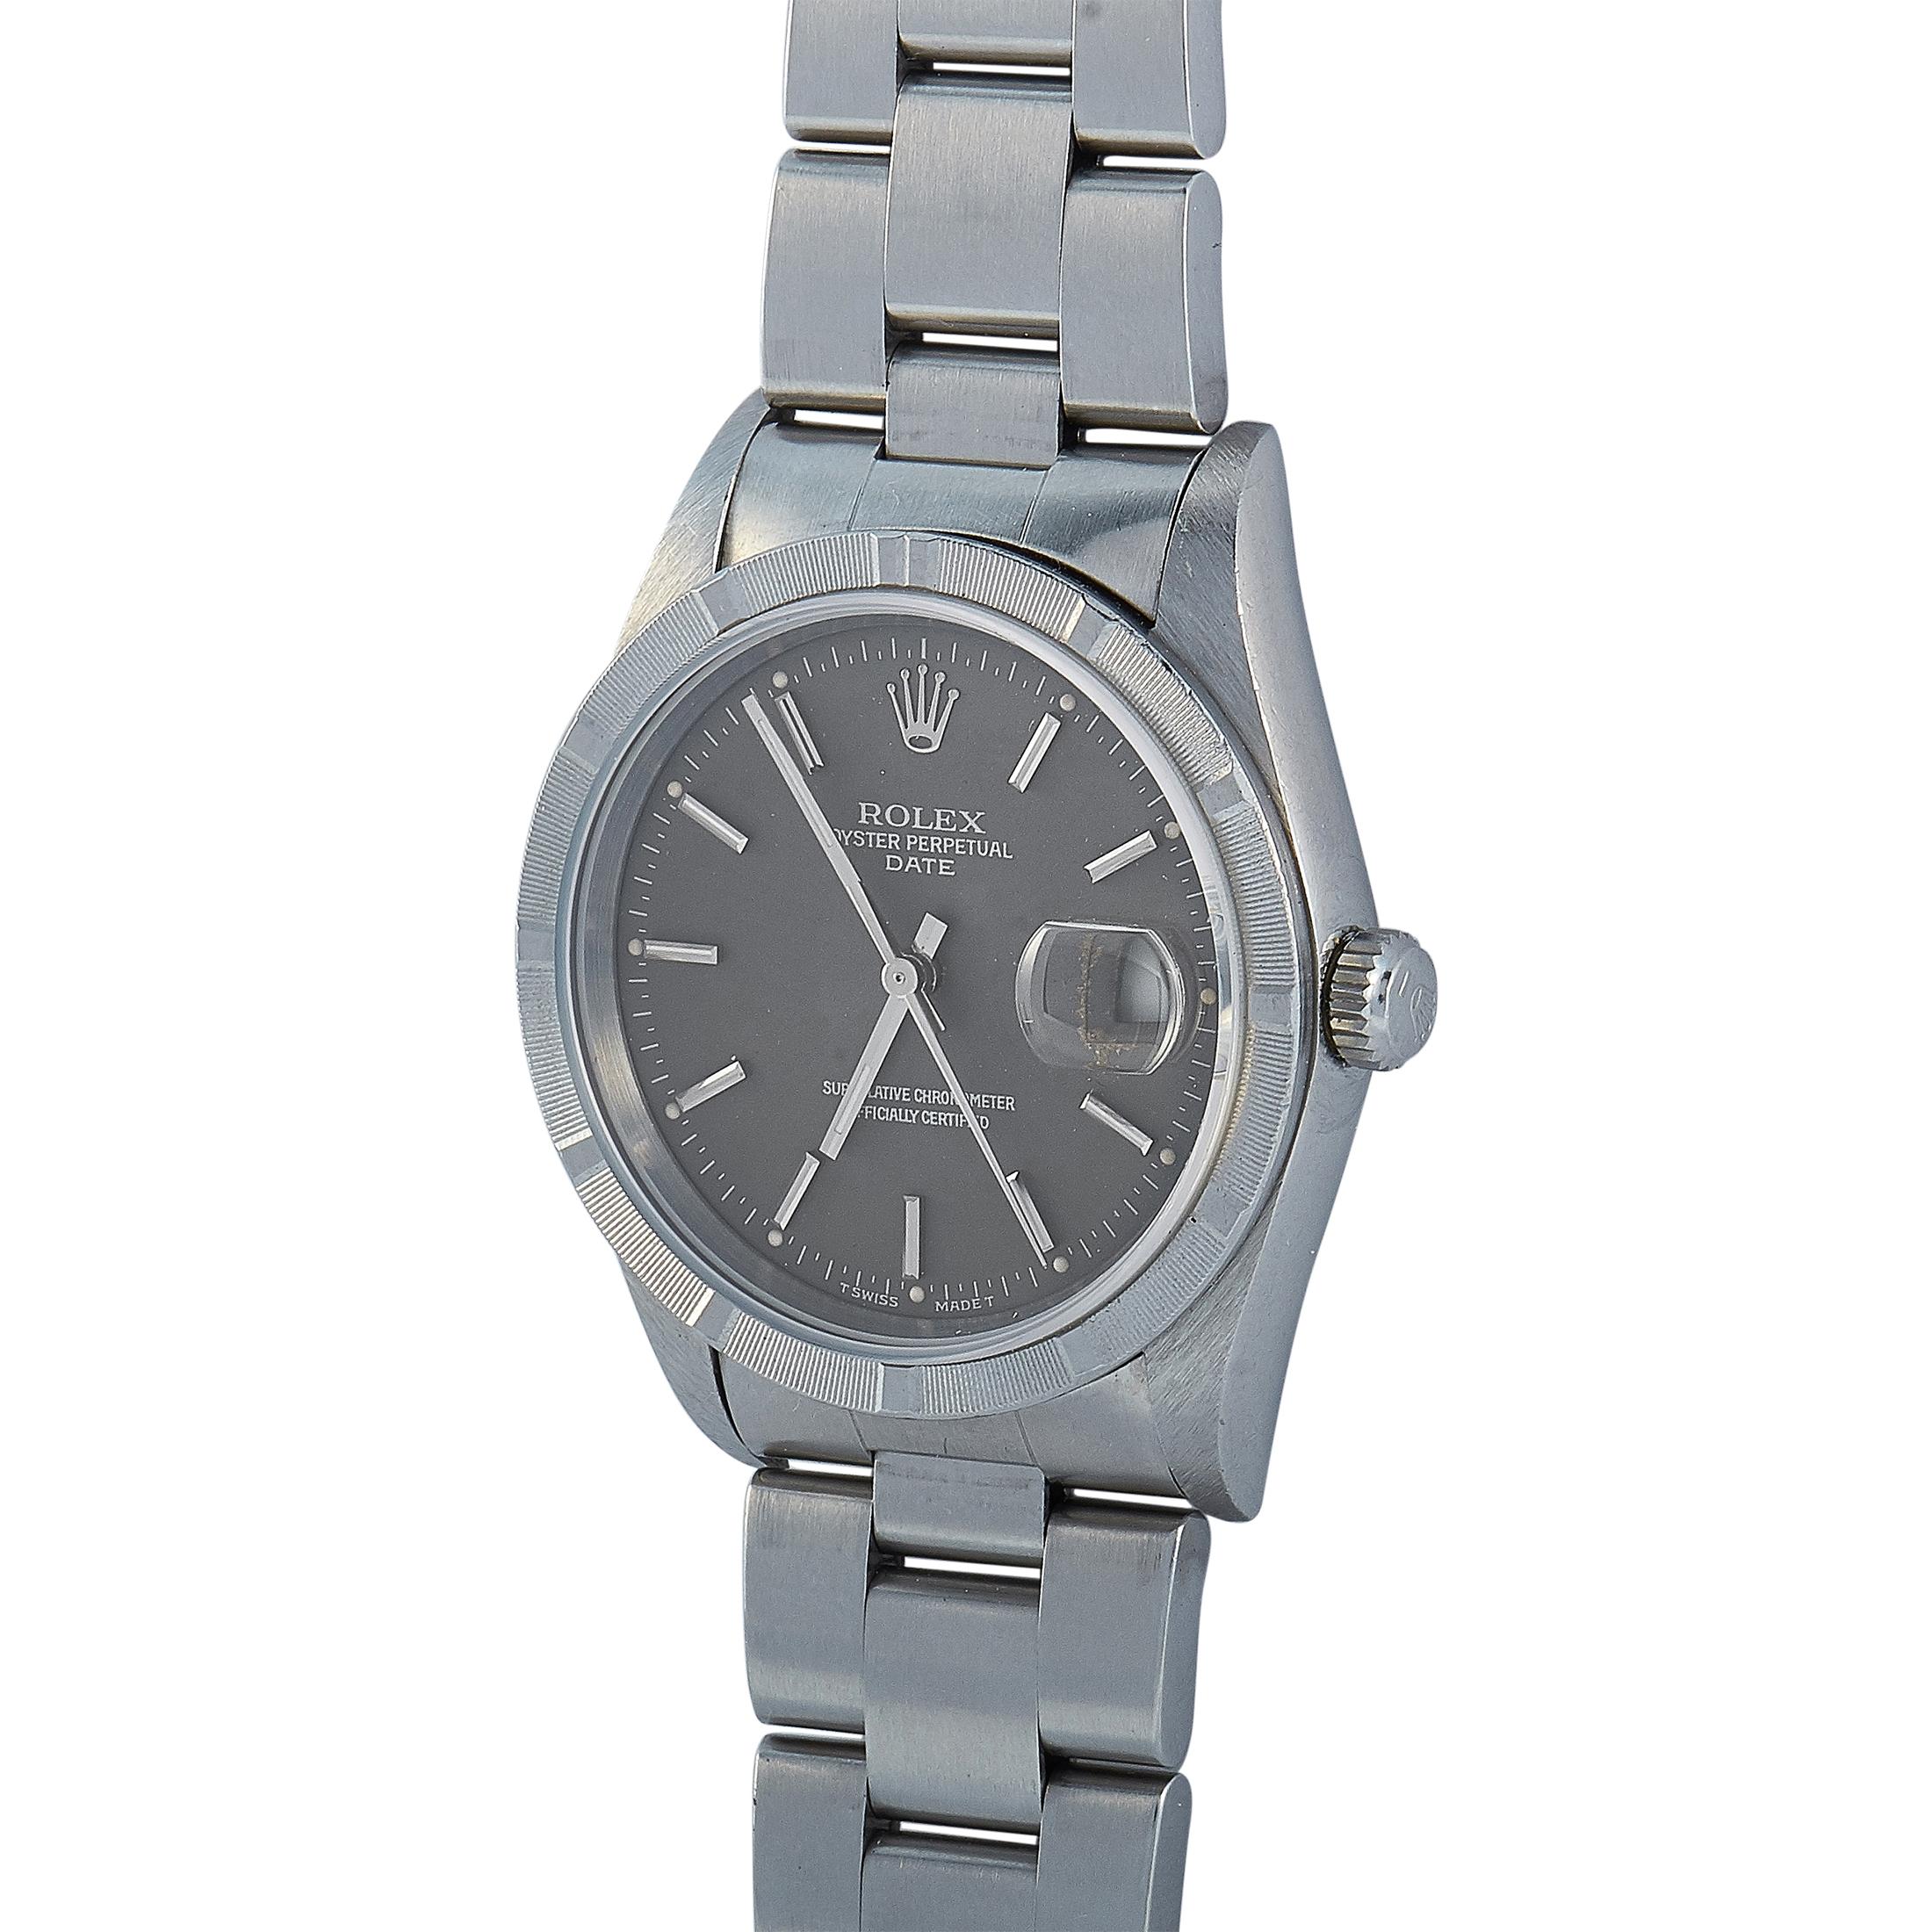 The Rolex Oyster Perpetual Date watch, reference number W785217, boasts a stainless steel case presented on a matching stainless steel bracelet. This model is equipped with a self-winding movement and features the following functions on the gray